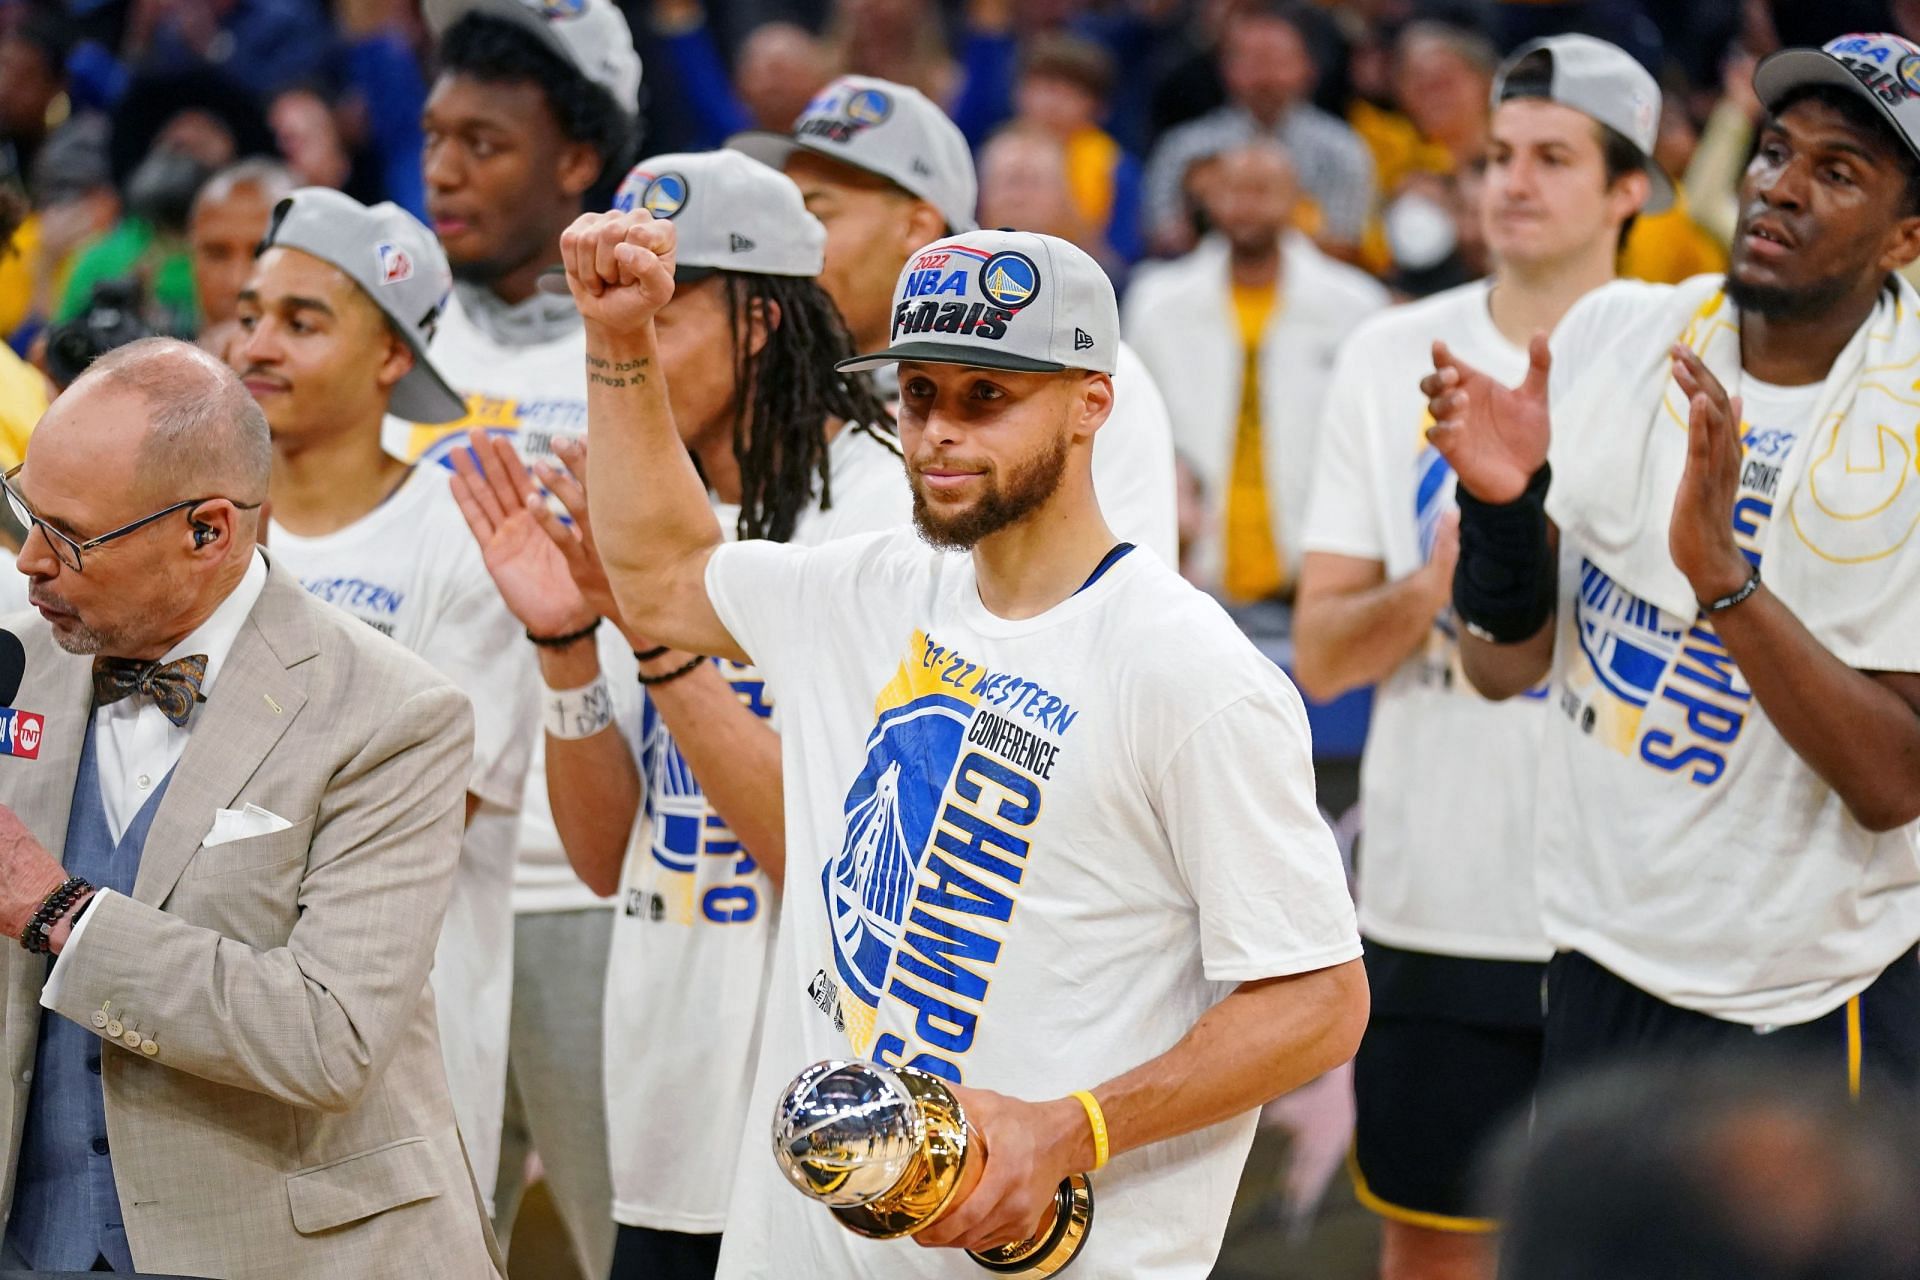 Warriors Steph Curry wins All-Star Game MVP - Golden State Of Mind